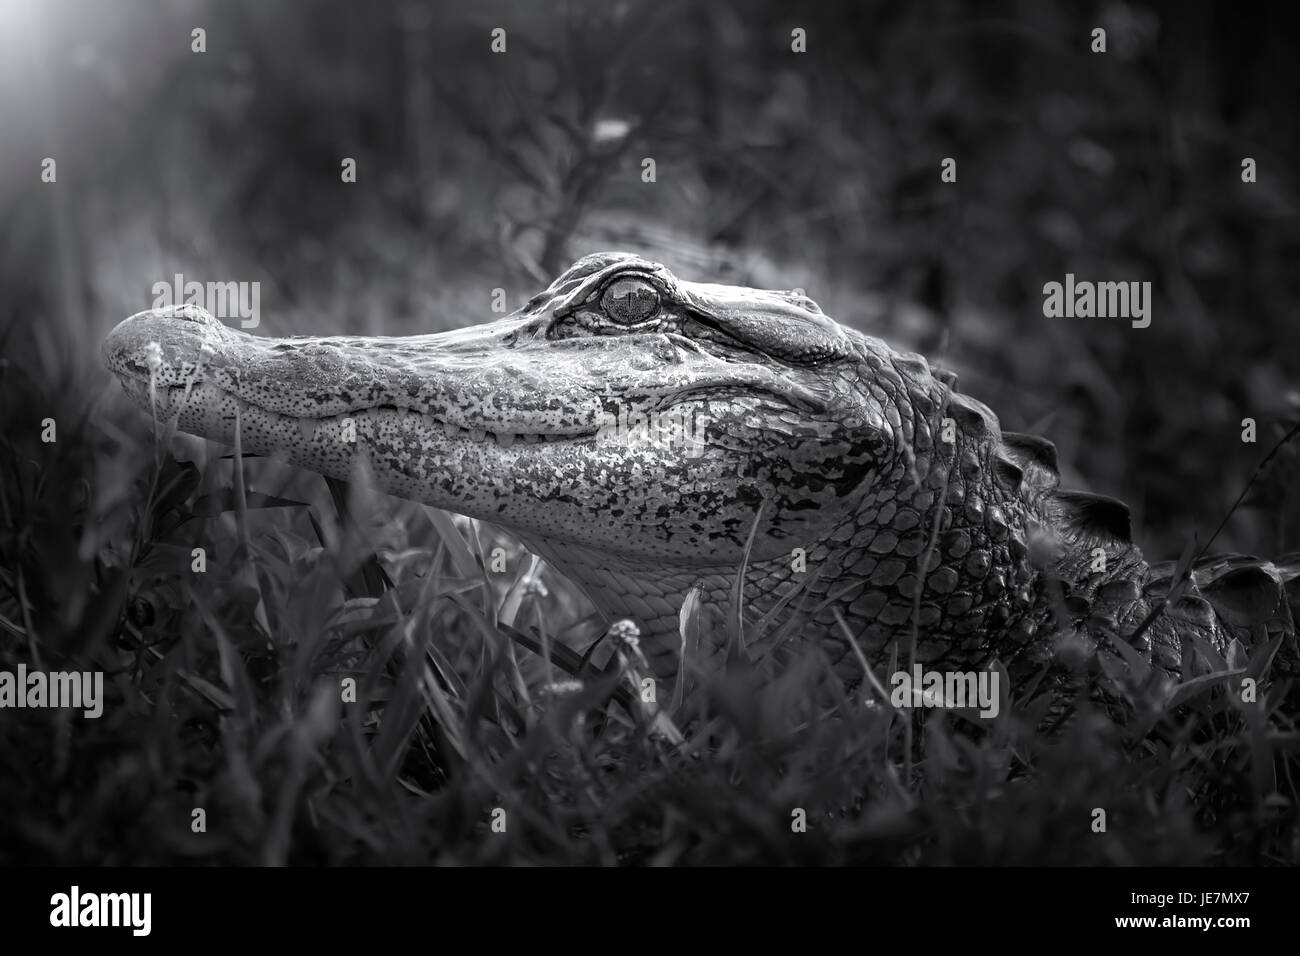 A young alligator photographed in the early morning hours in the Florida Everglades. Stock Photo